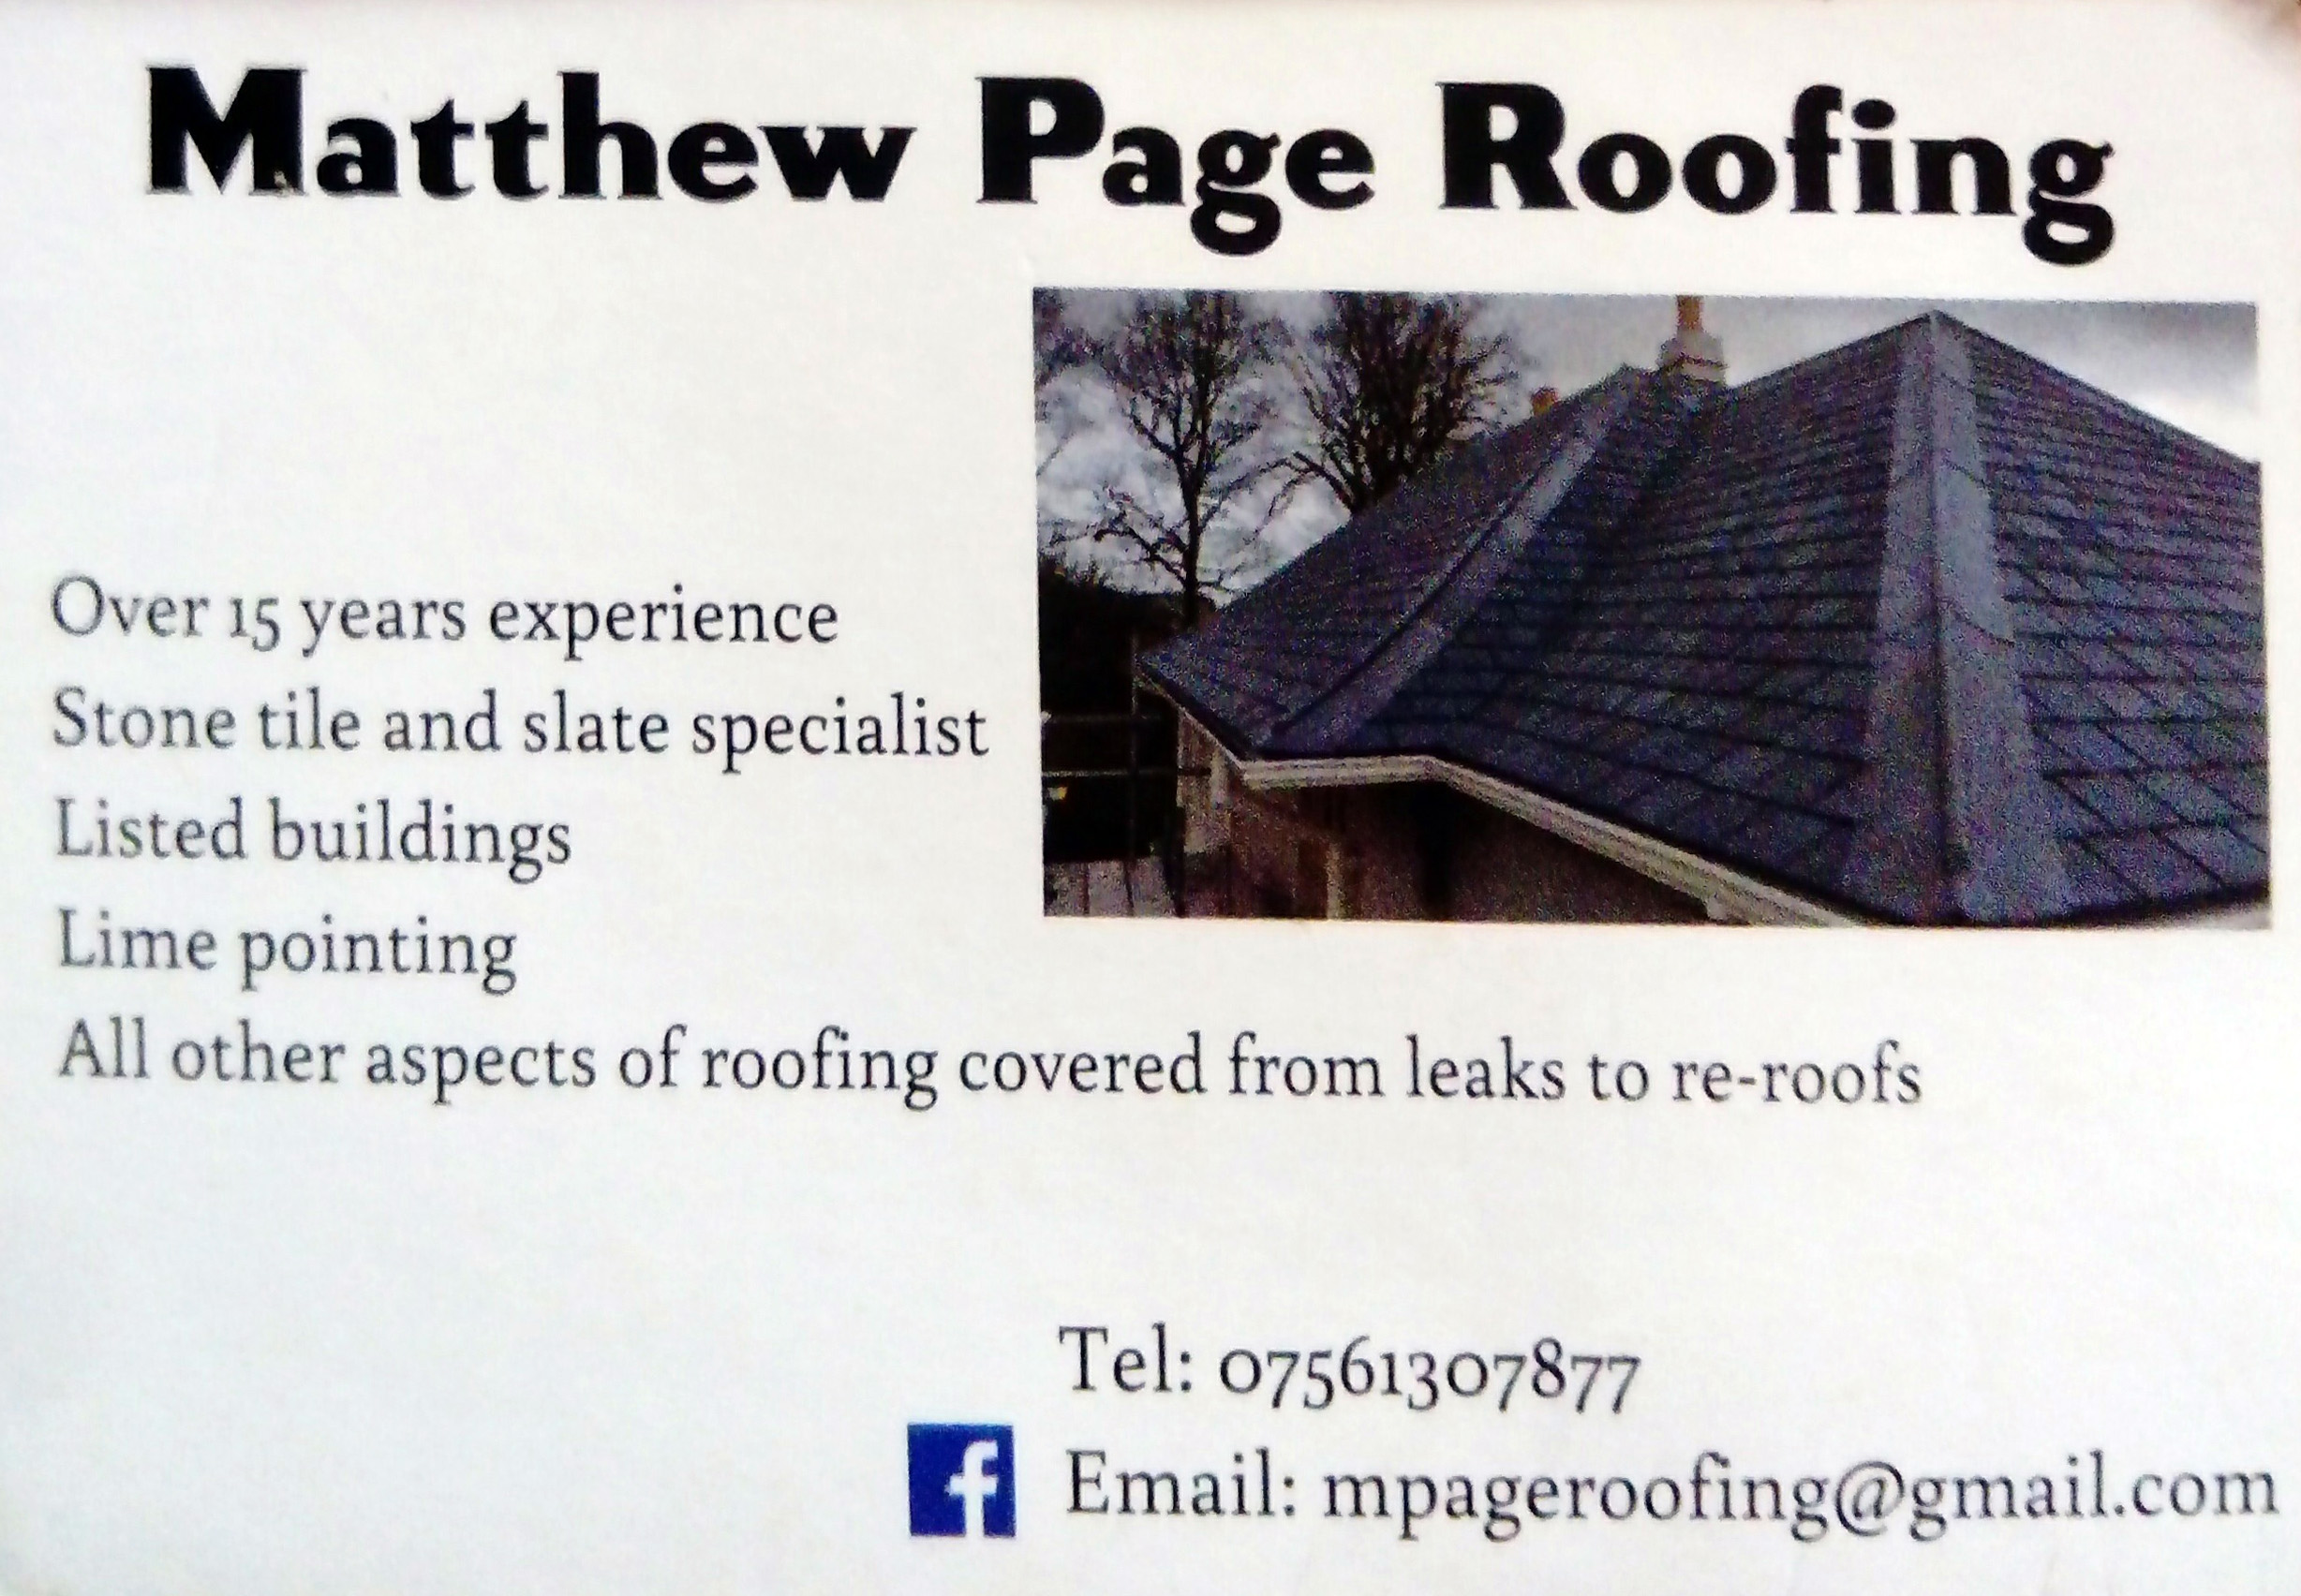 Mattew Page Roofing